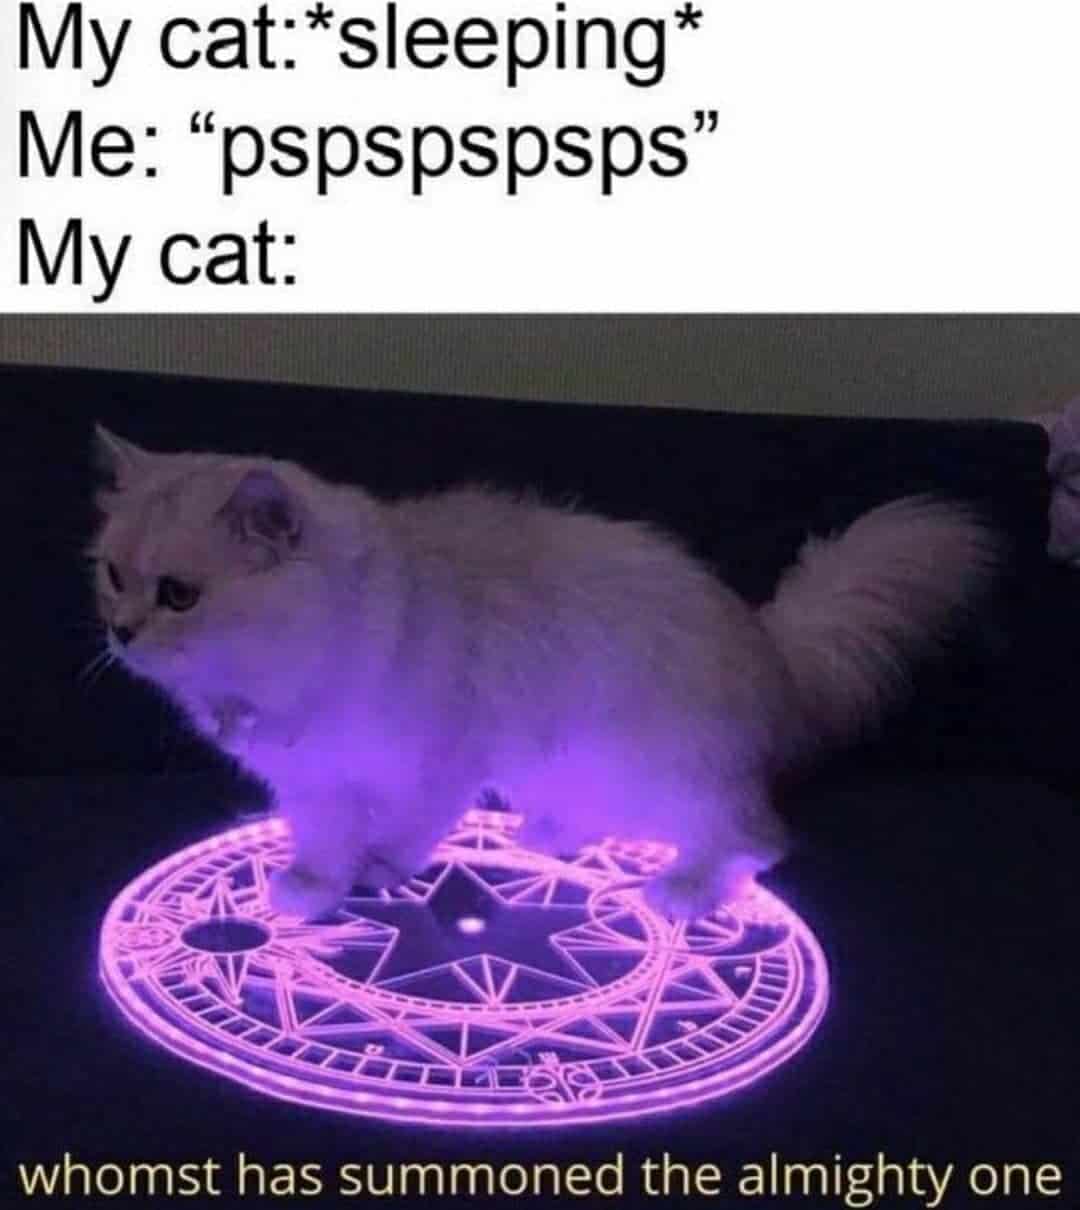 the cat stands on the pentagram